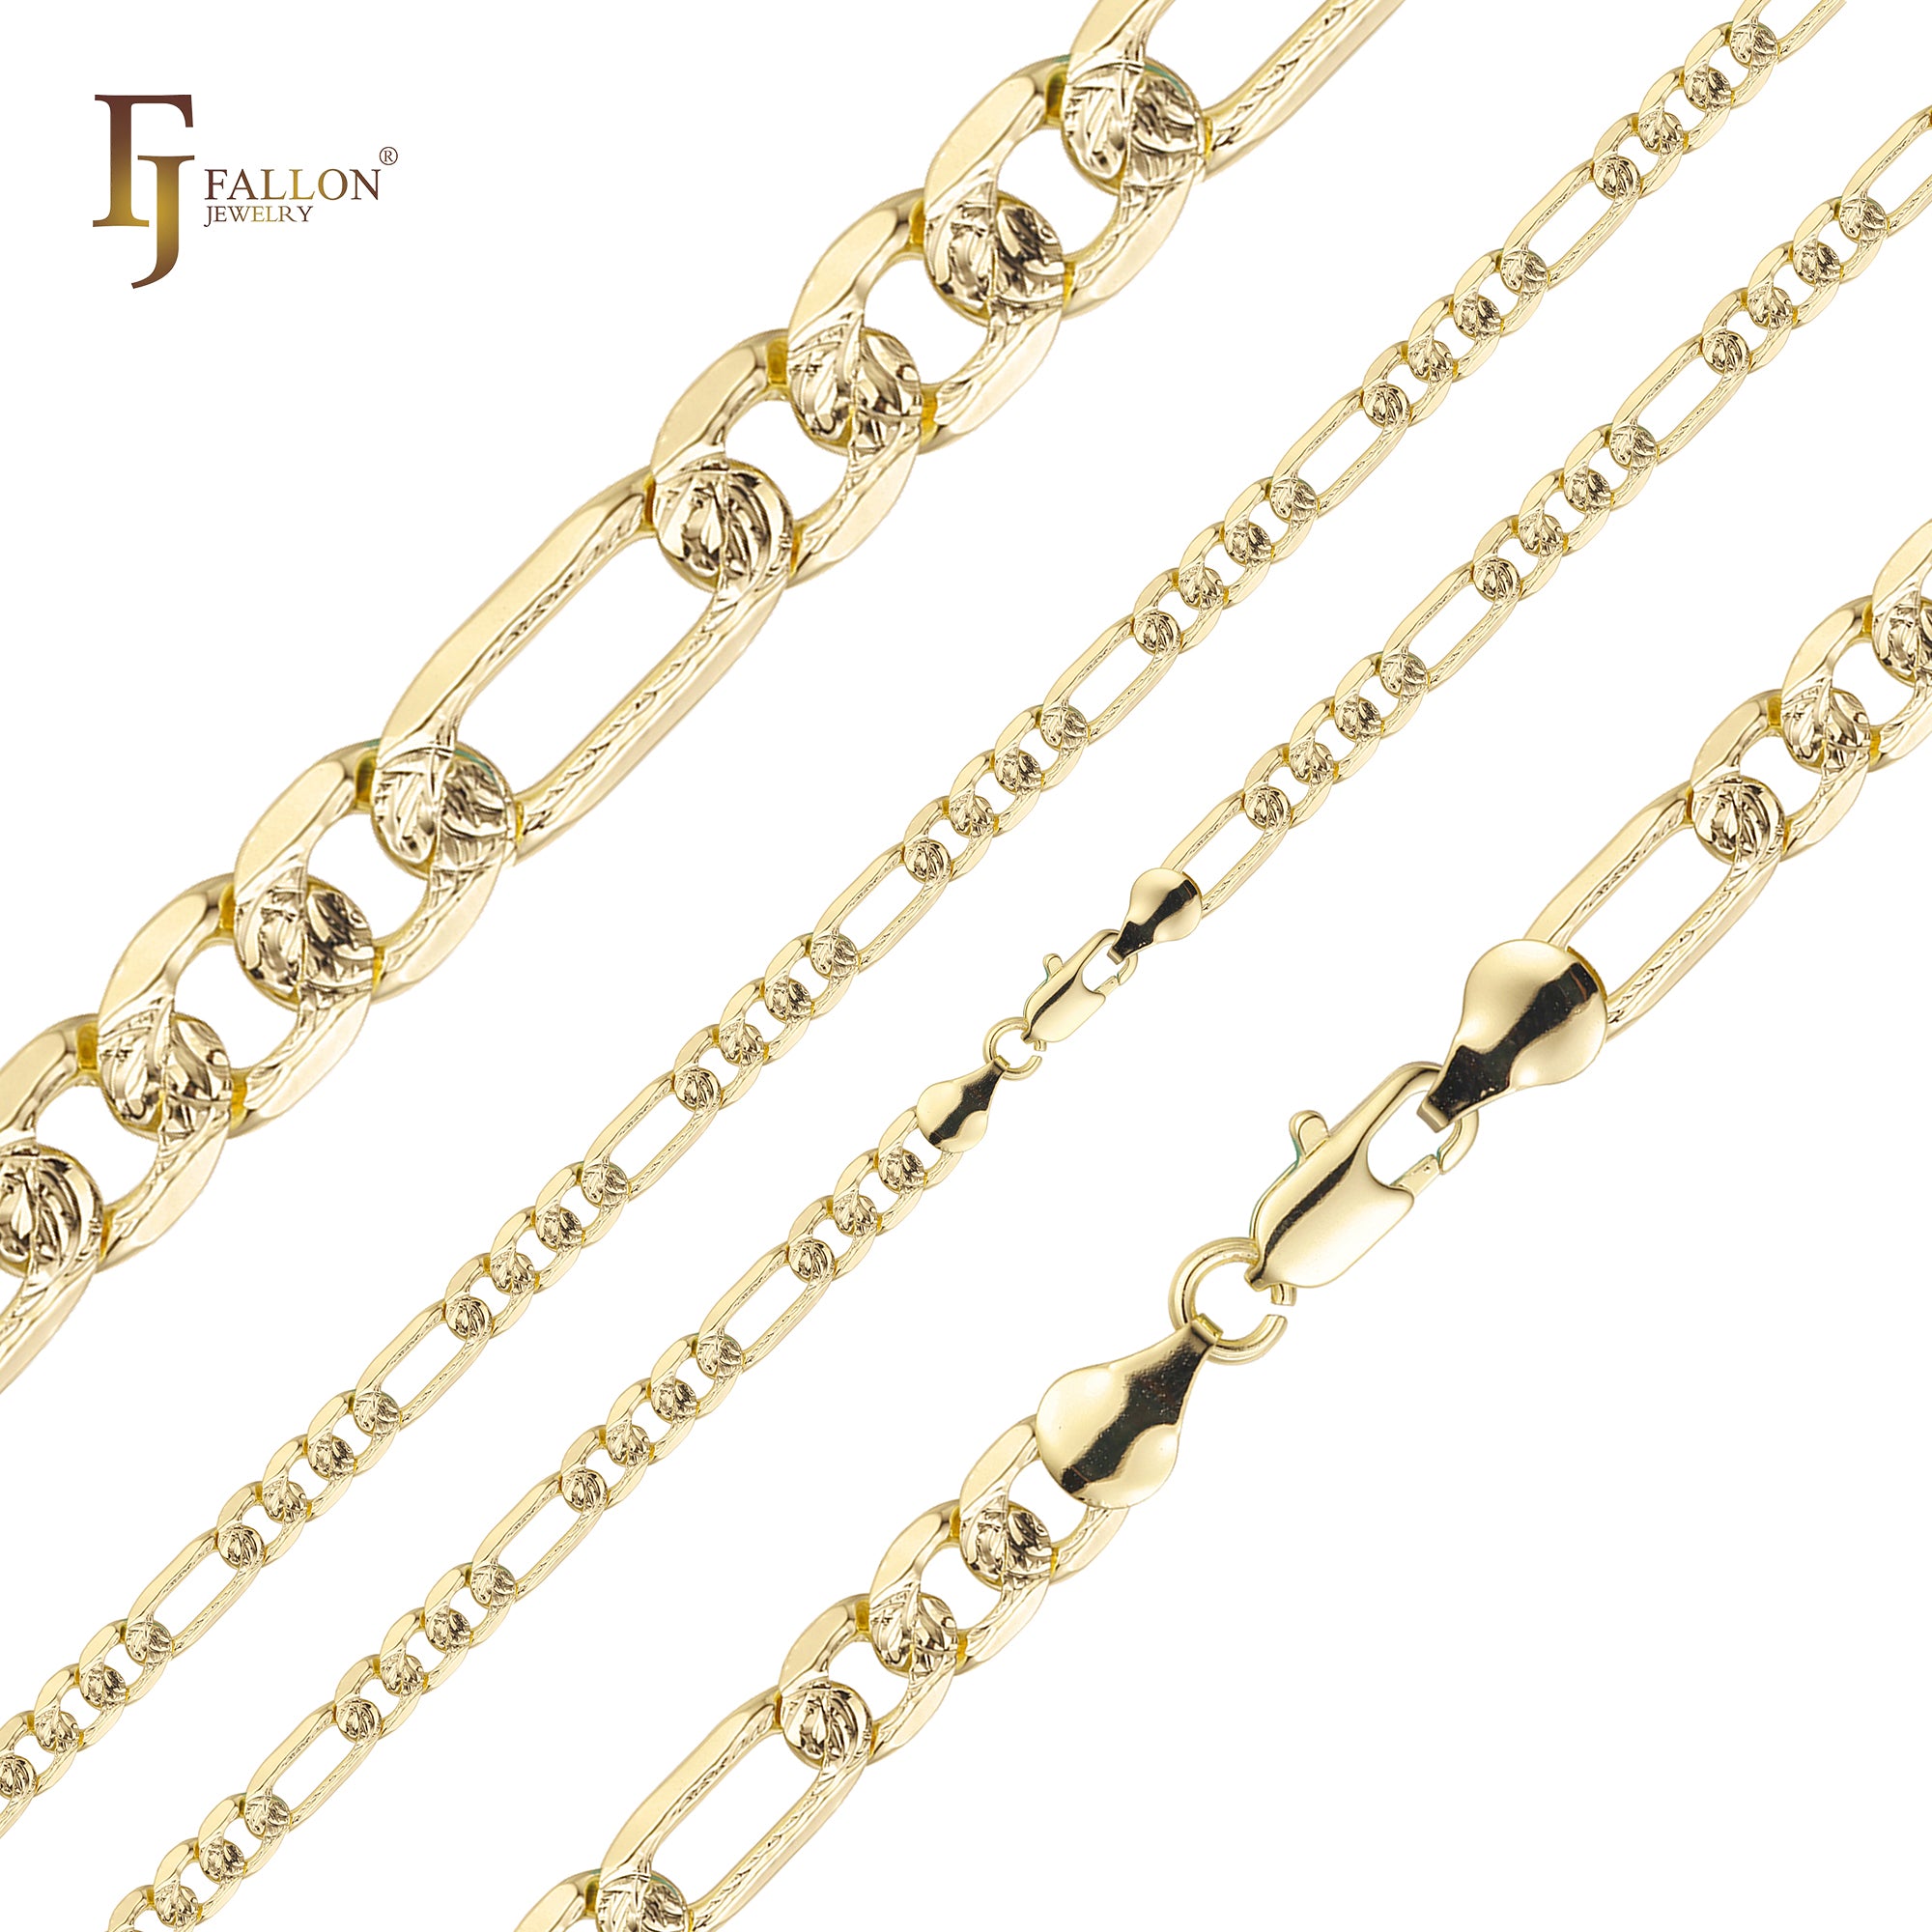 Figaro link ripple hammered chains plated in 14K Gold